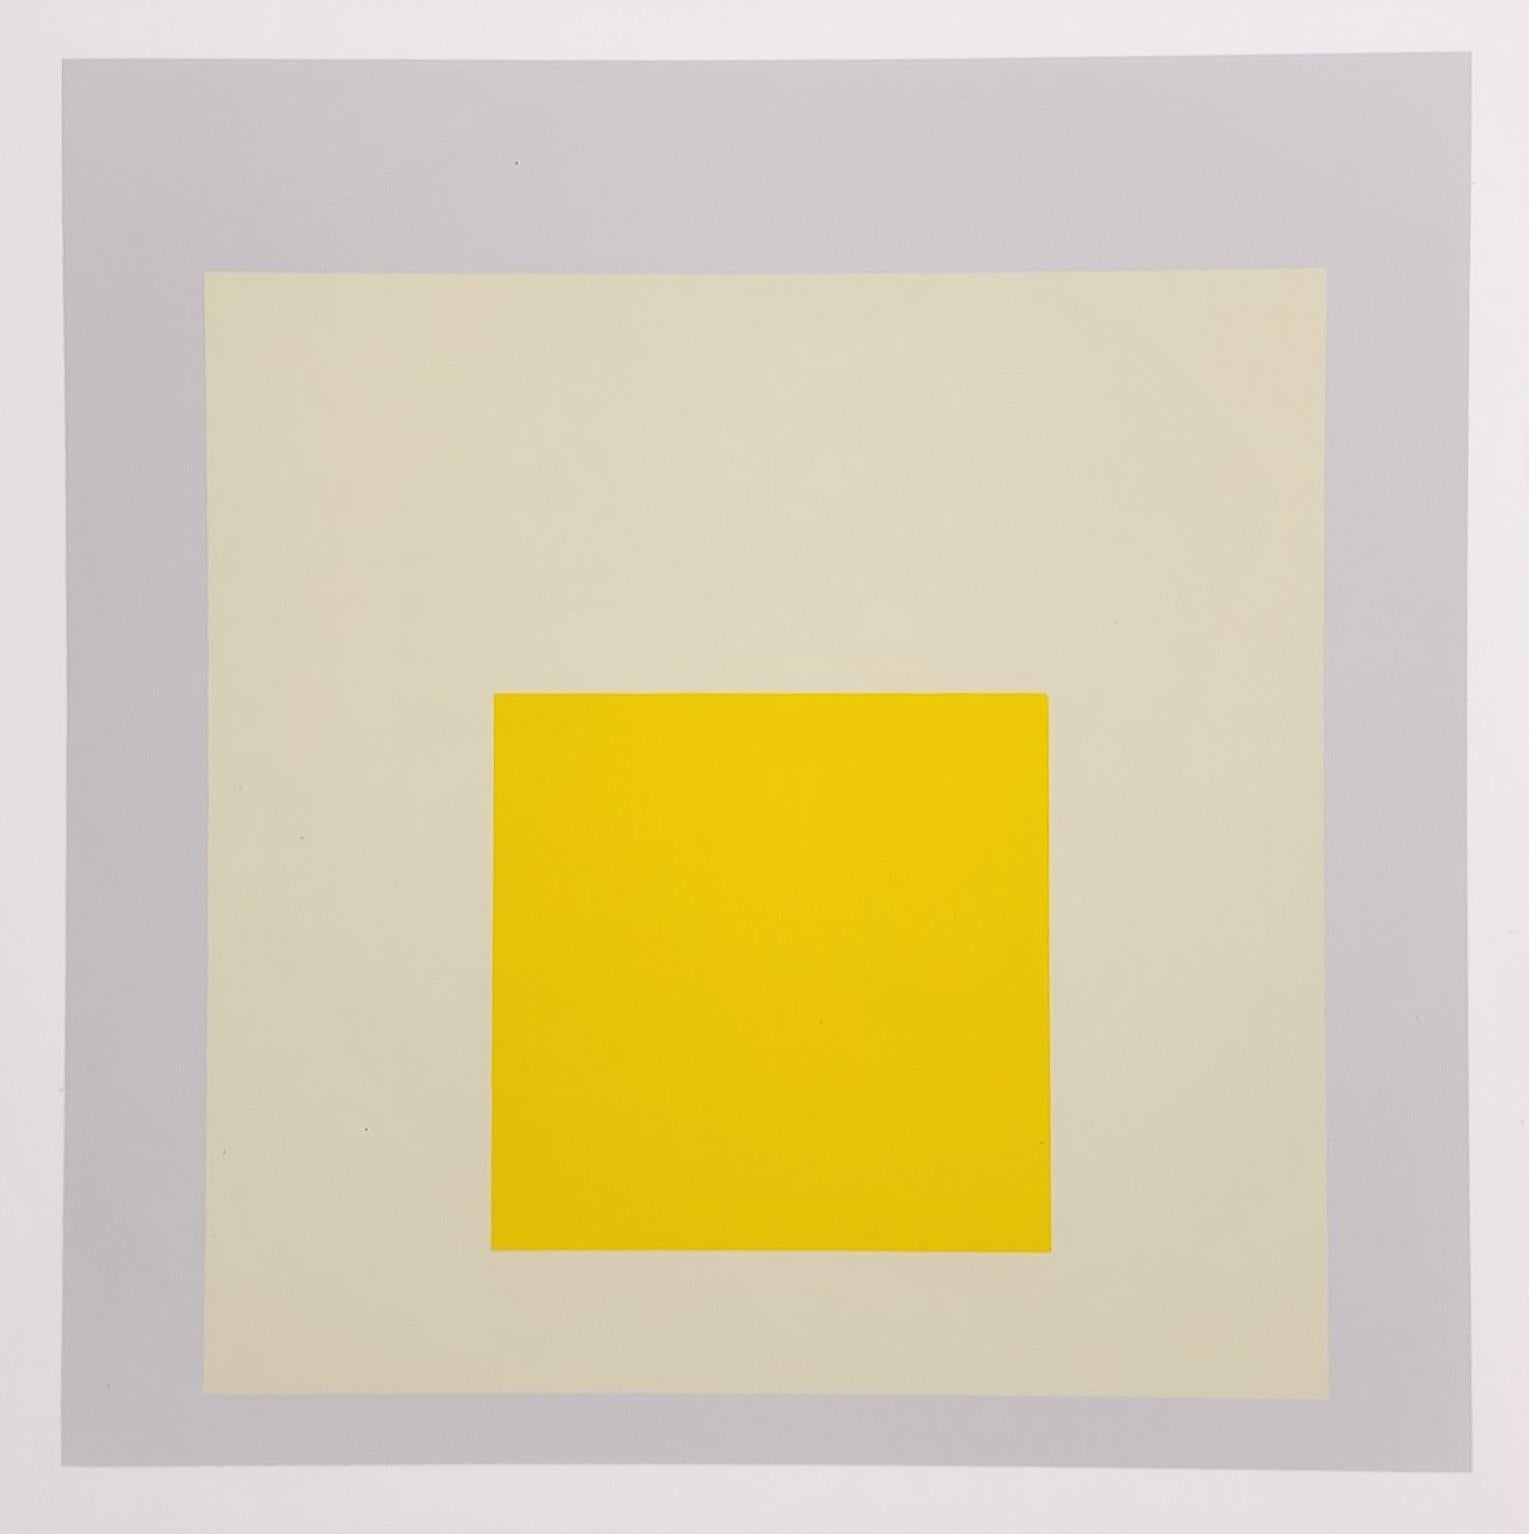 Homage to the Square: Six Silkscreen Prints (~56% OFF LIST PRICE - LIMITED TIME) 6